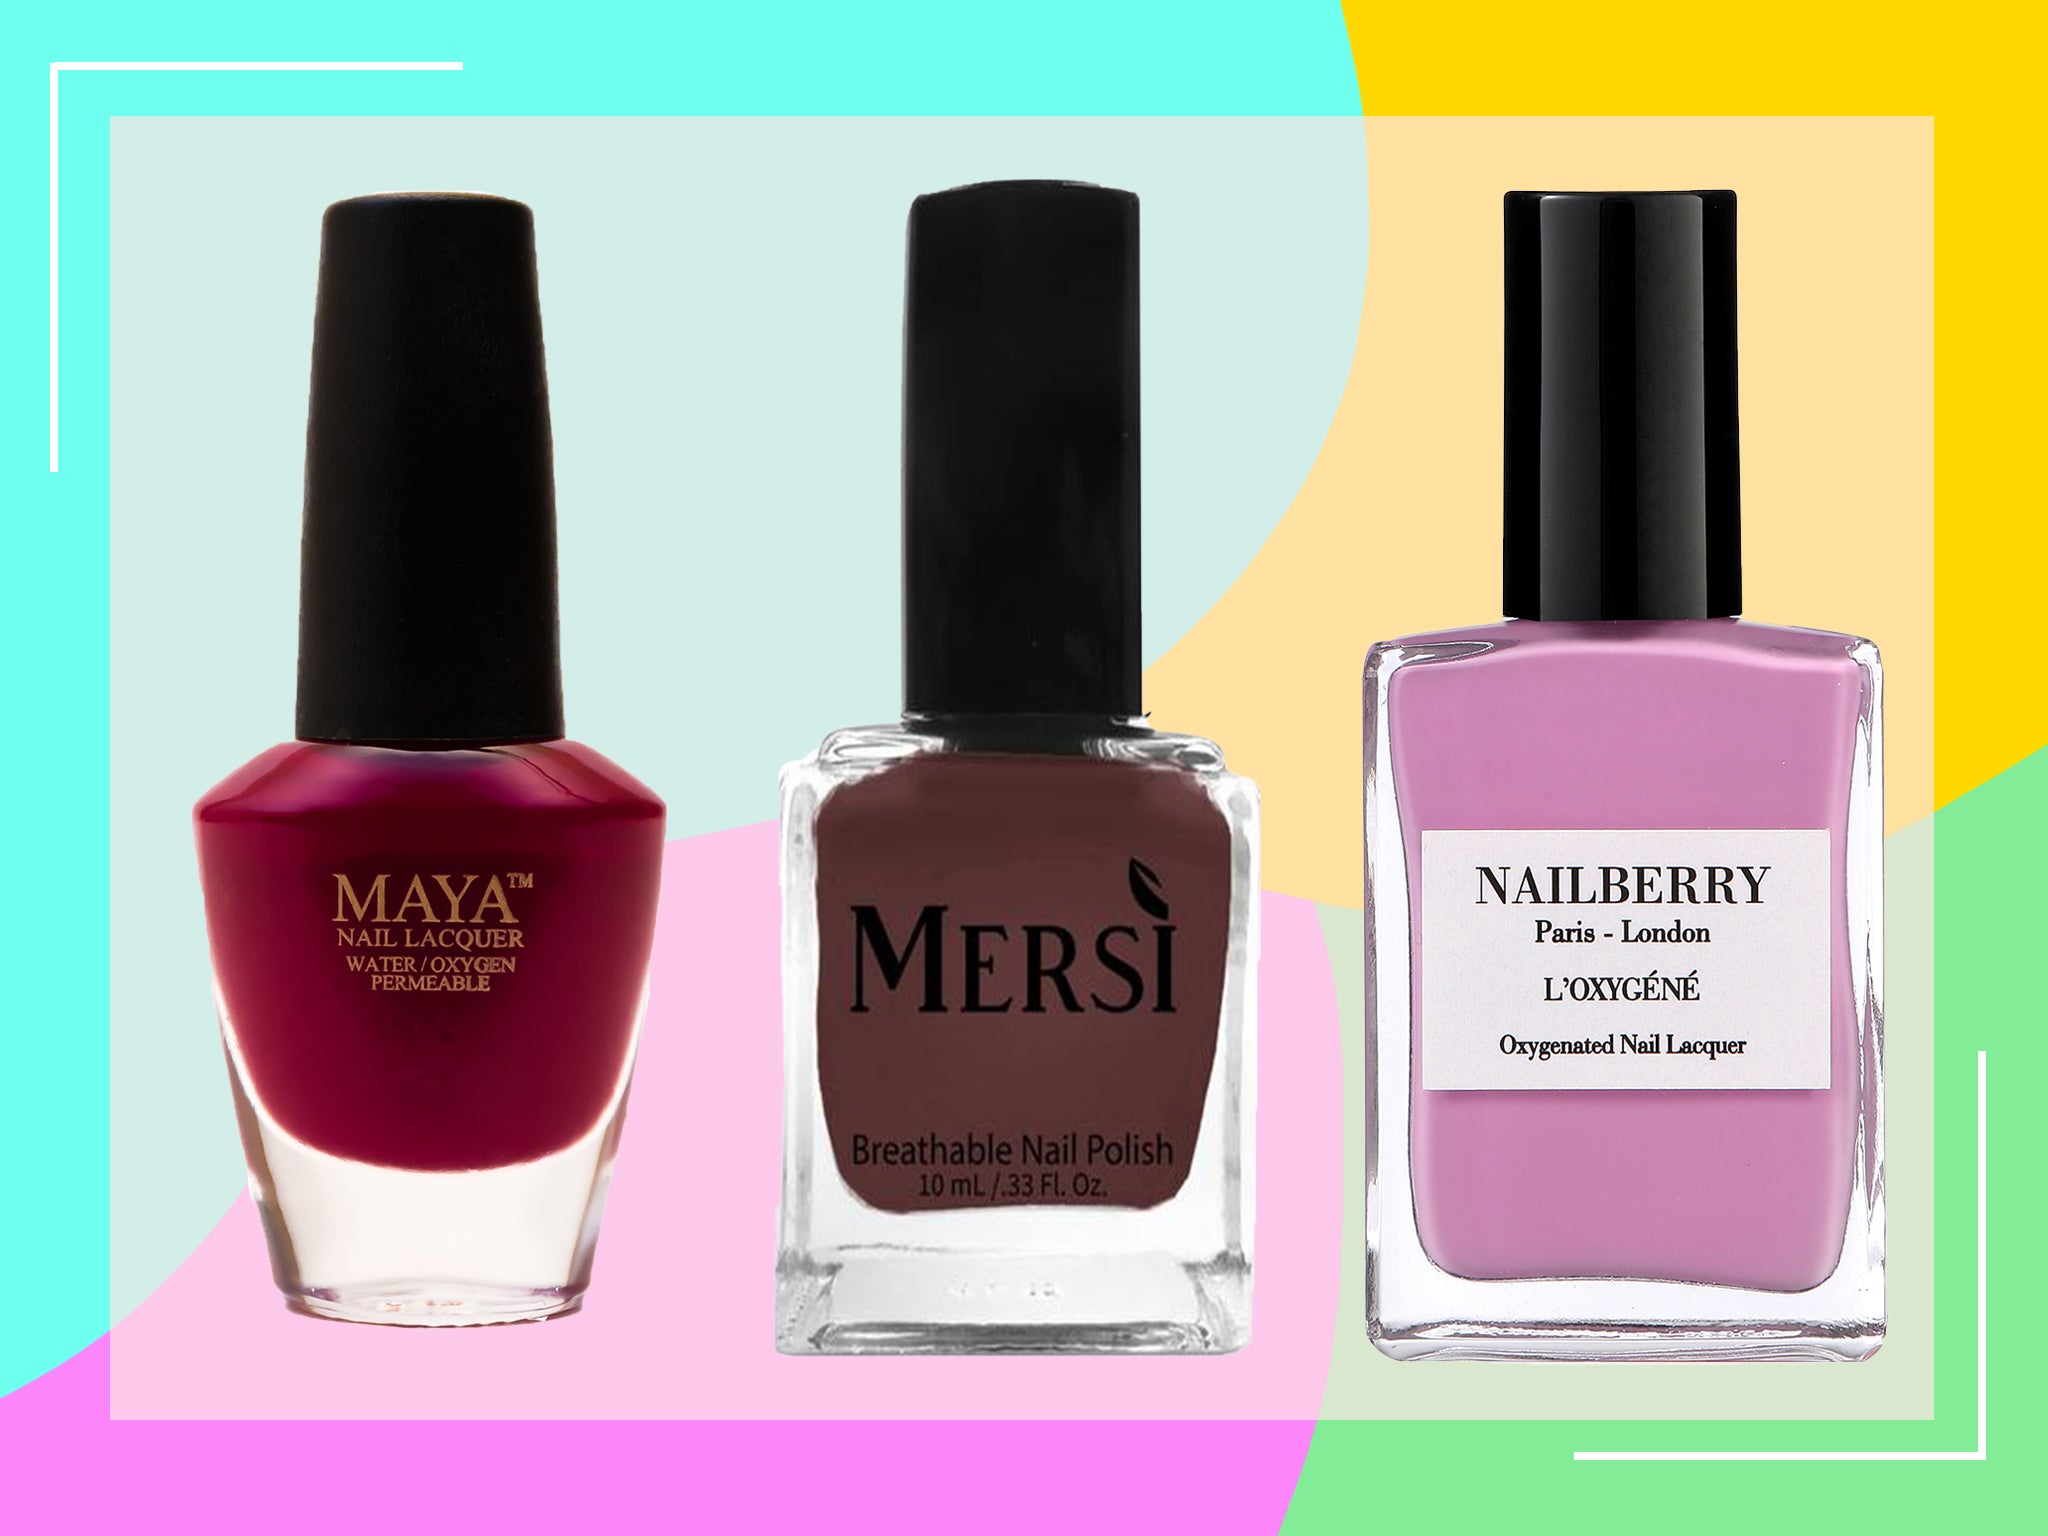 Top 5 Halal Nail Polish Brands You Should Care About - The Halal Times